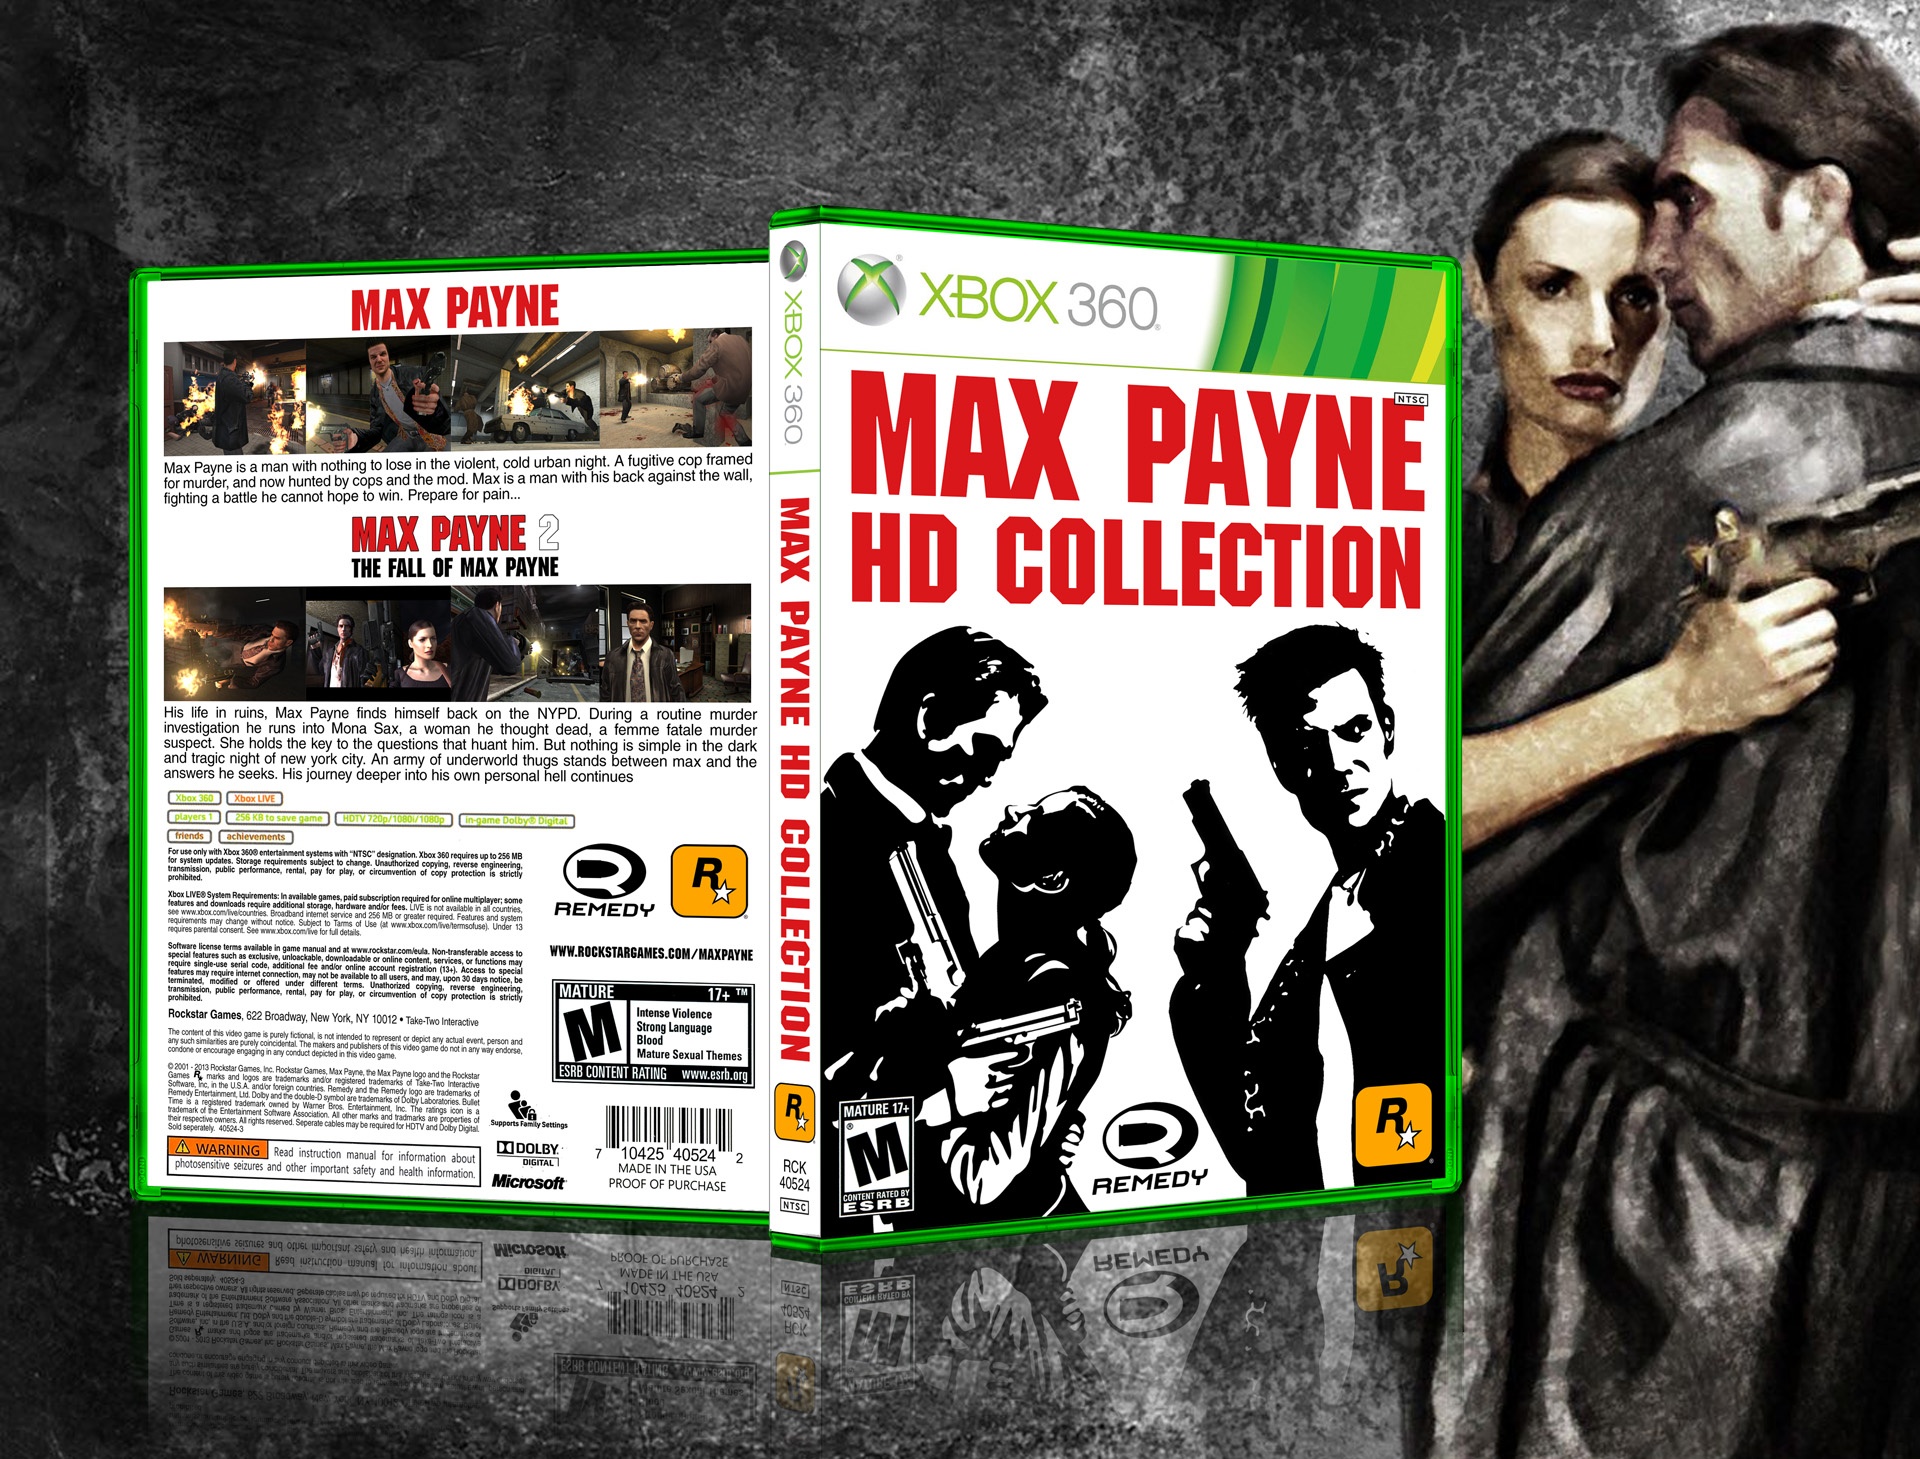 Max Payne HD Collection box cover